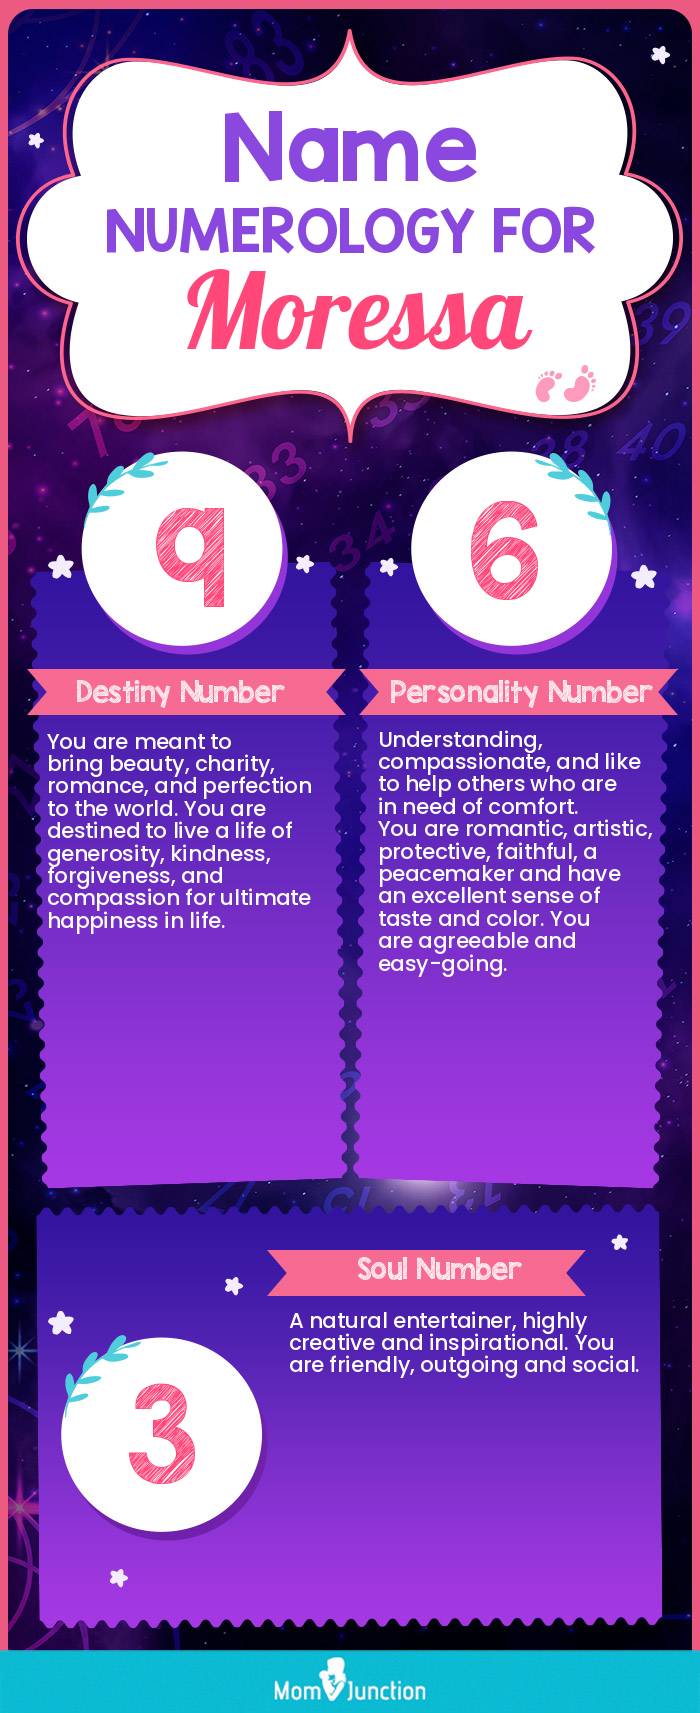 name-numerology-for-moressa-girl